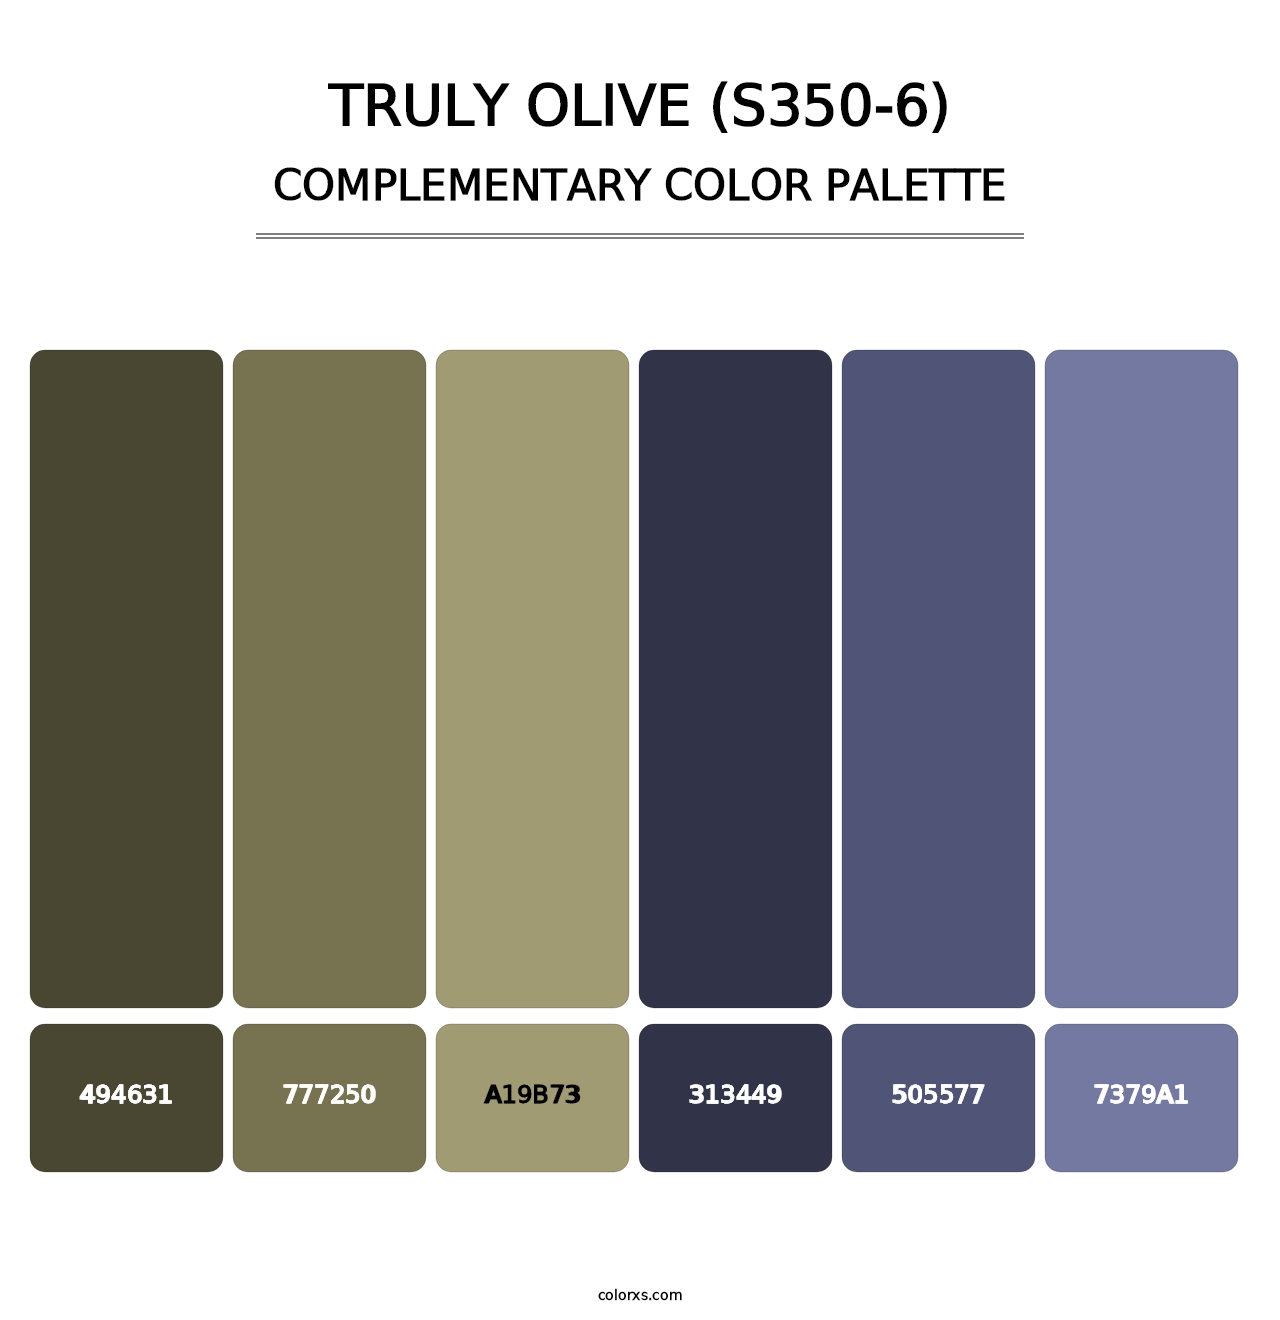 Truly Olive (S350-6) - Complementary Color Palette